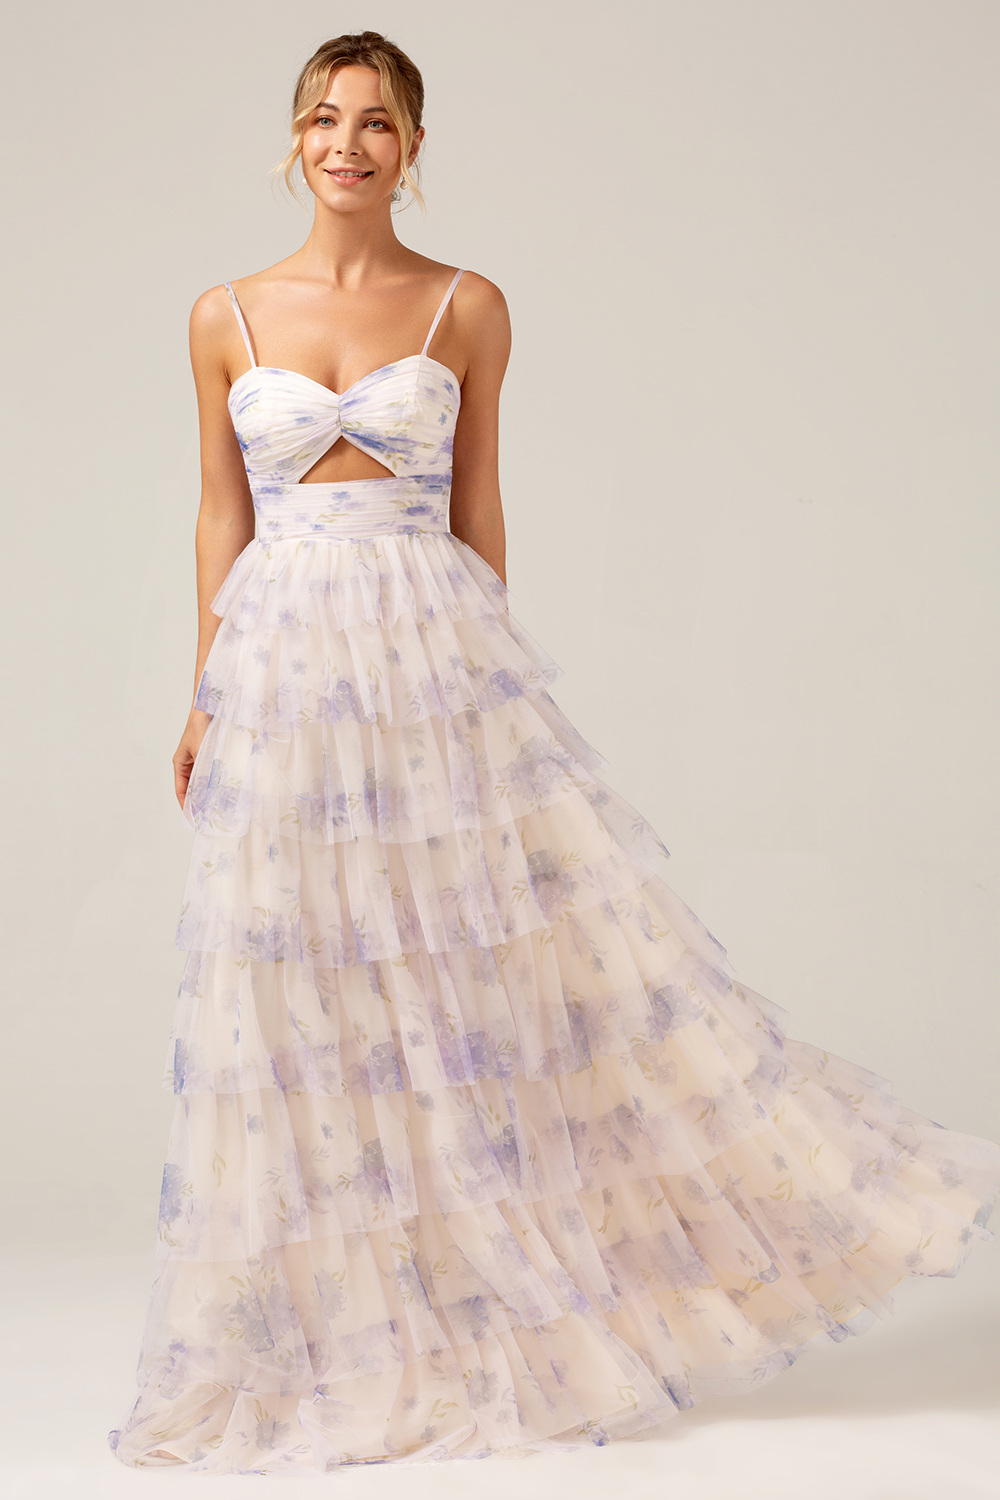 Tiered Lavender Flower Print Pleated Spaghetti Straps Bridesmaid Dress with Hollow-out